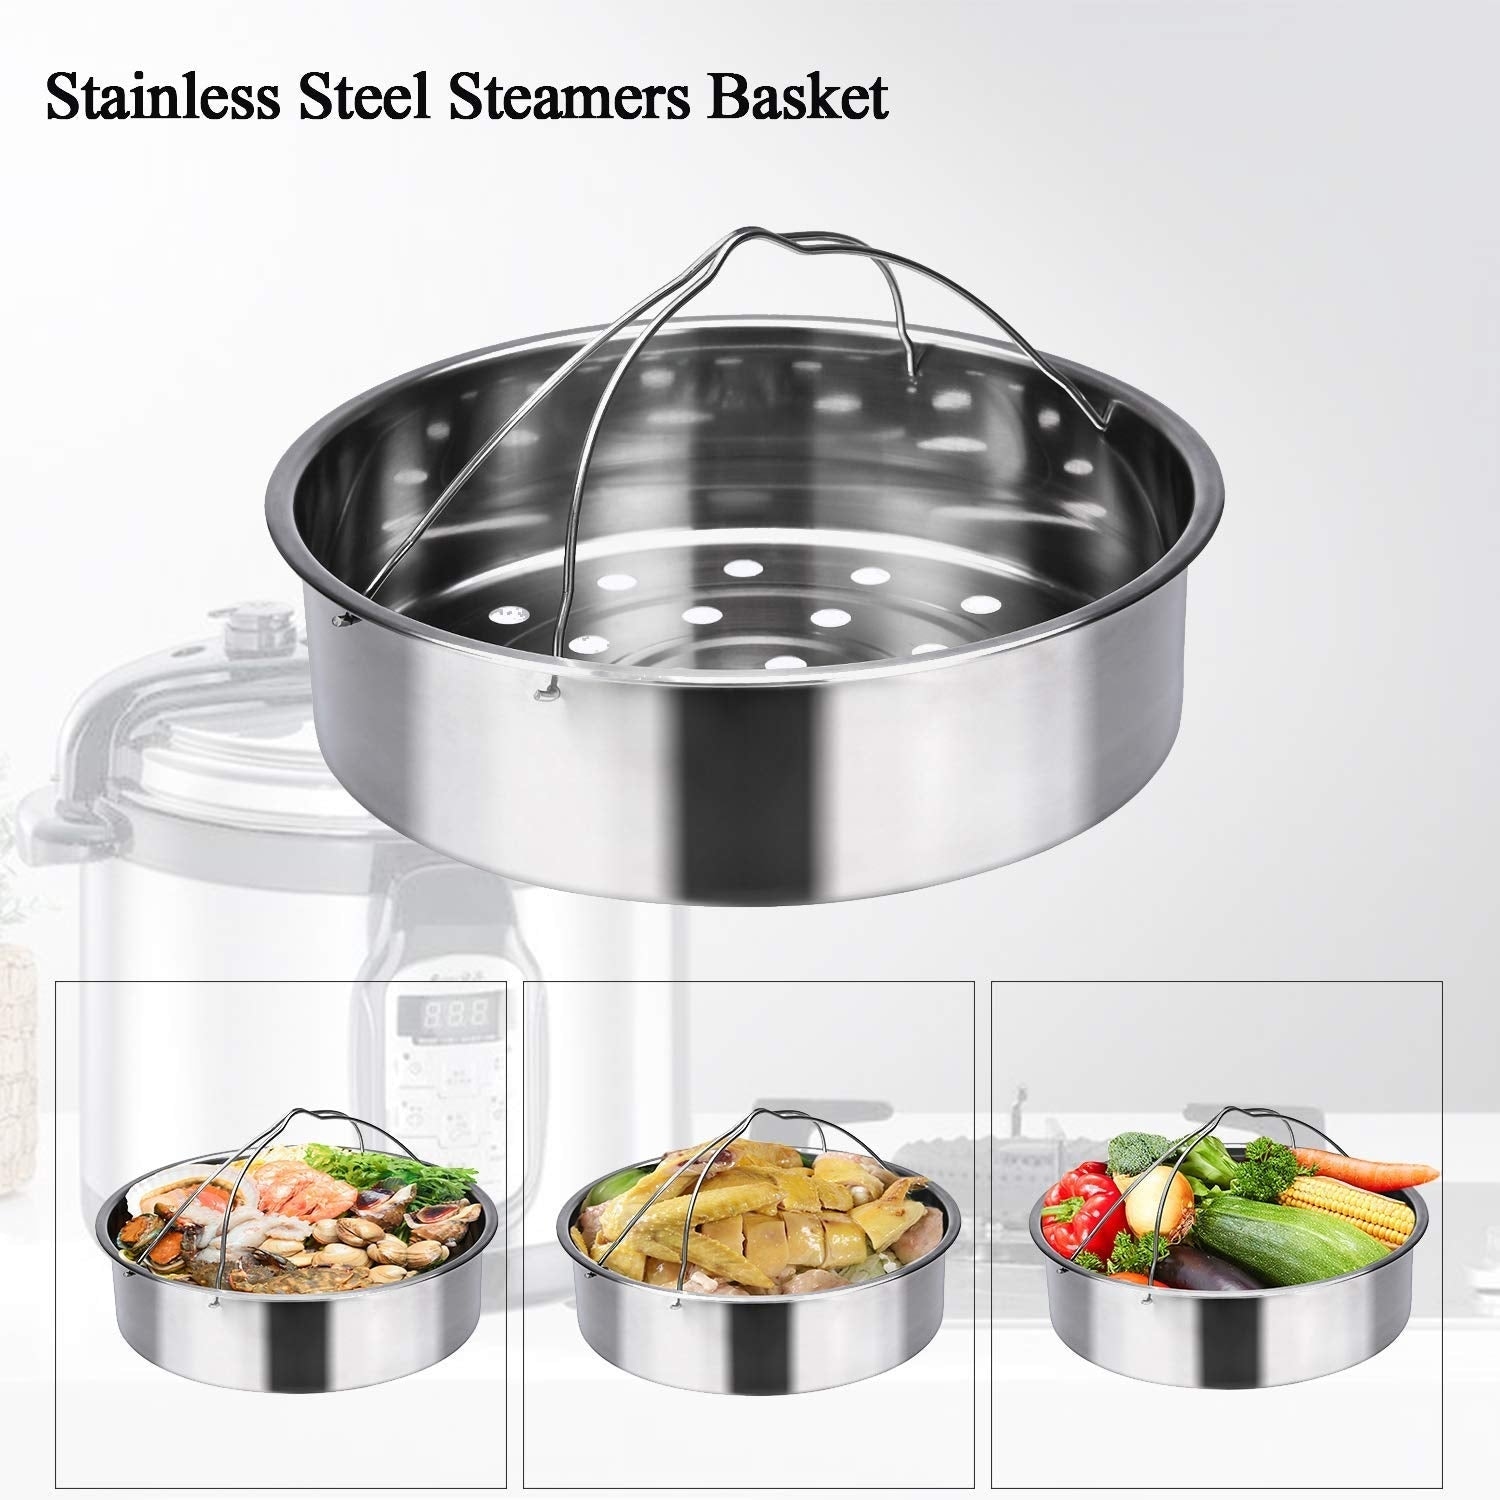 https://ak1.ostkcdn.com/images/products/is/images/direct/ac51355e20ff6b6236936bfc7fe3a87647199a81/8-Pack-Electric-Pressure-Cookers-Accessories-Set-Compatible-with-Instant-Pot-5%2C-6%2C-8-Quart%2C-Steamer-Basket%2C-Egg.jpg